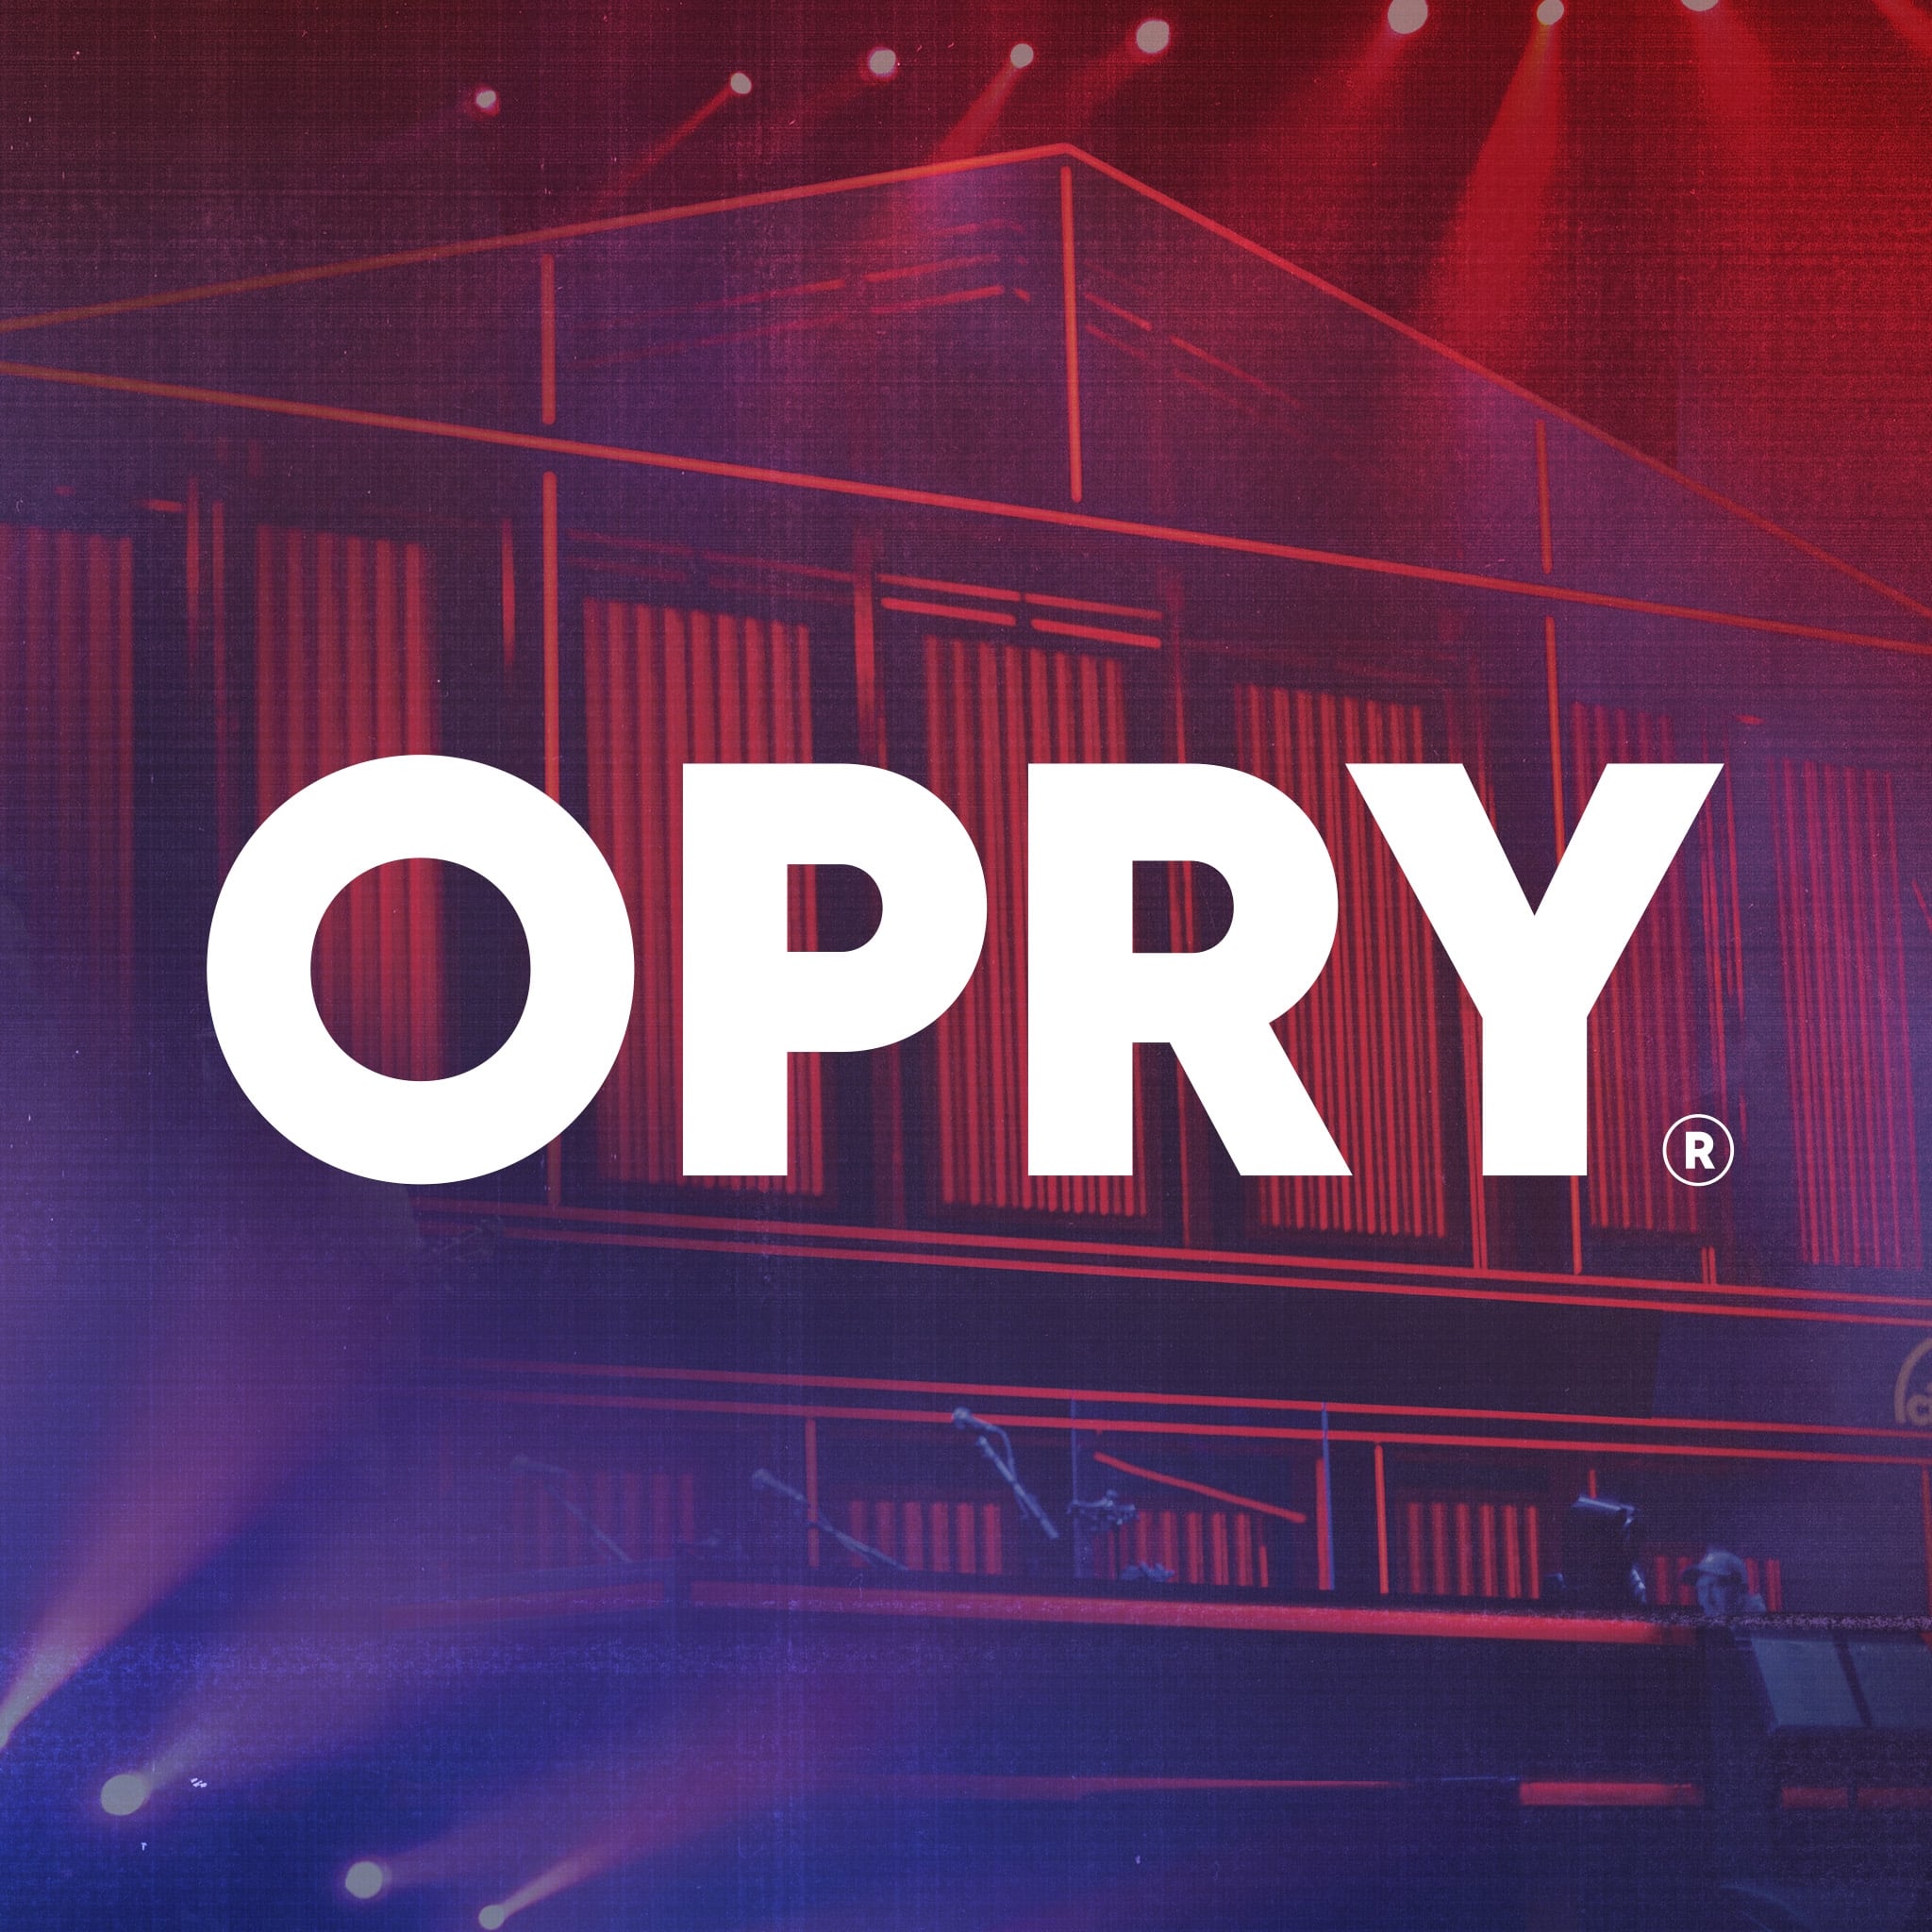 A few artists have been banned from the Opry over the years